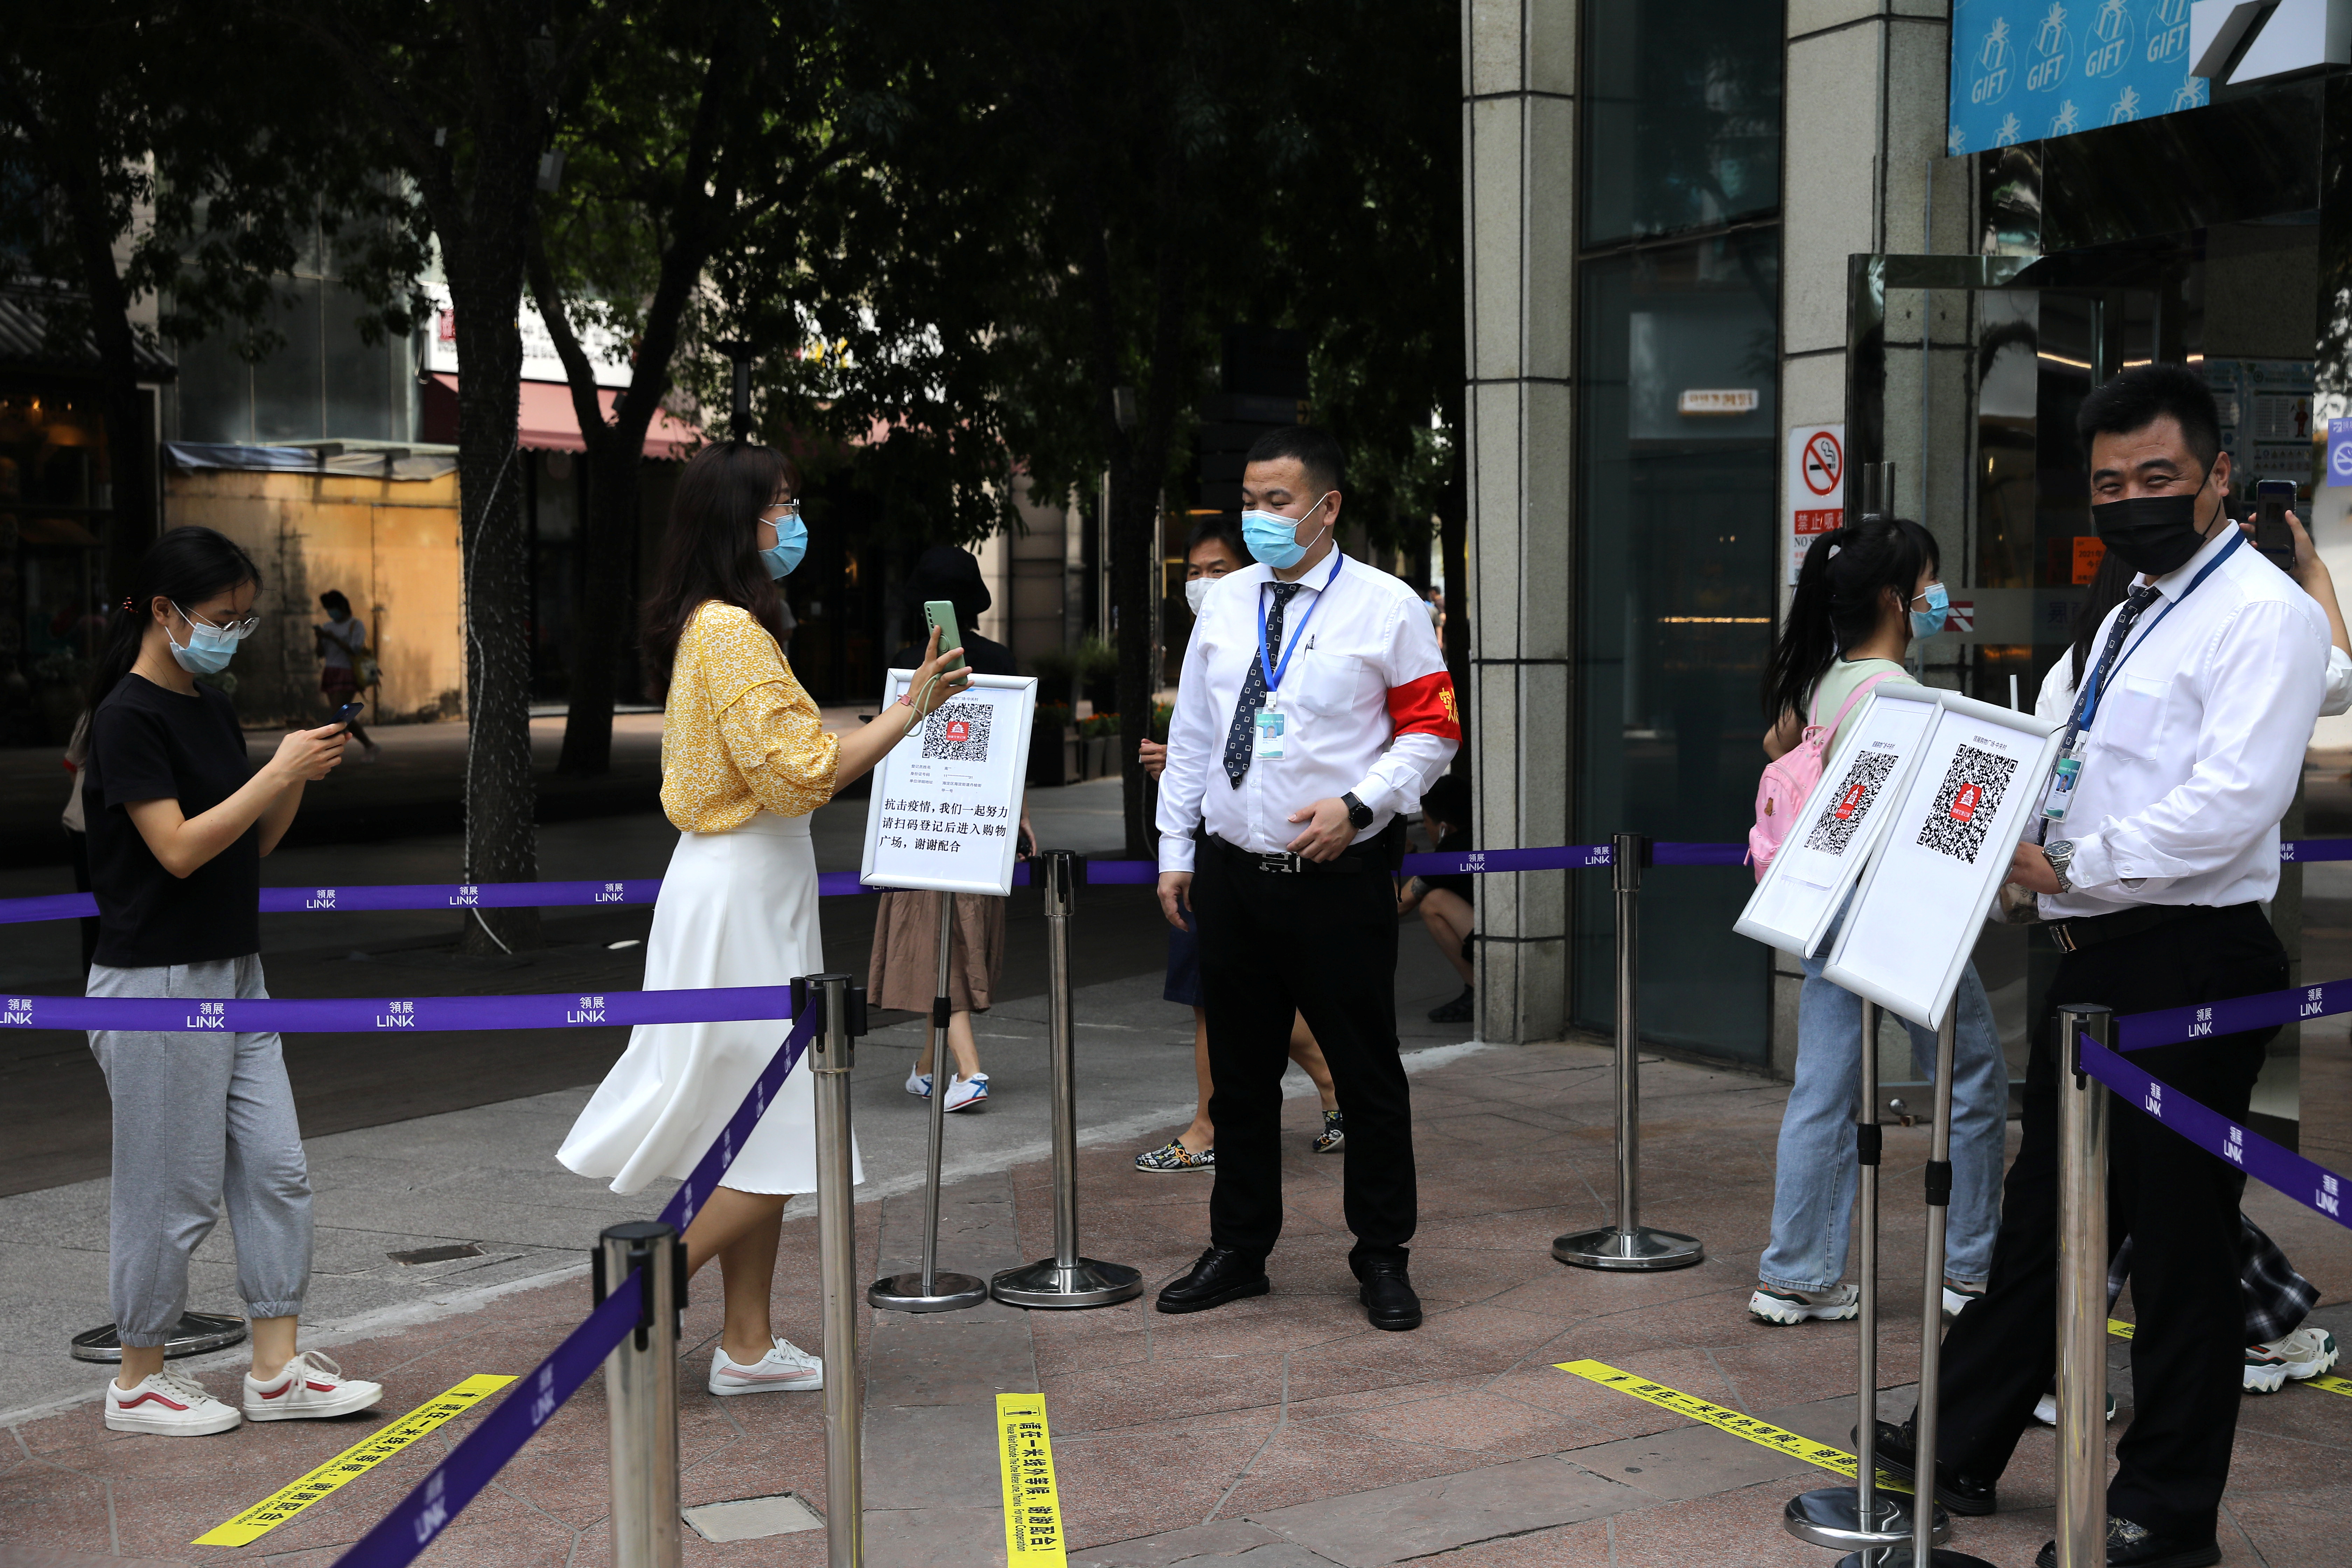 A woman shows her health status on a phone to a security guard, at an entrance of a shopping mall in Beijing, China August 23, 2021. REUTERS/Tingshu Wang